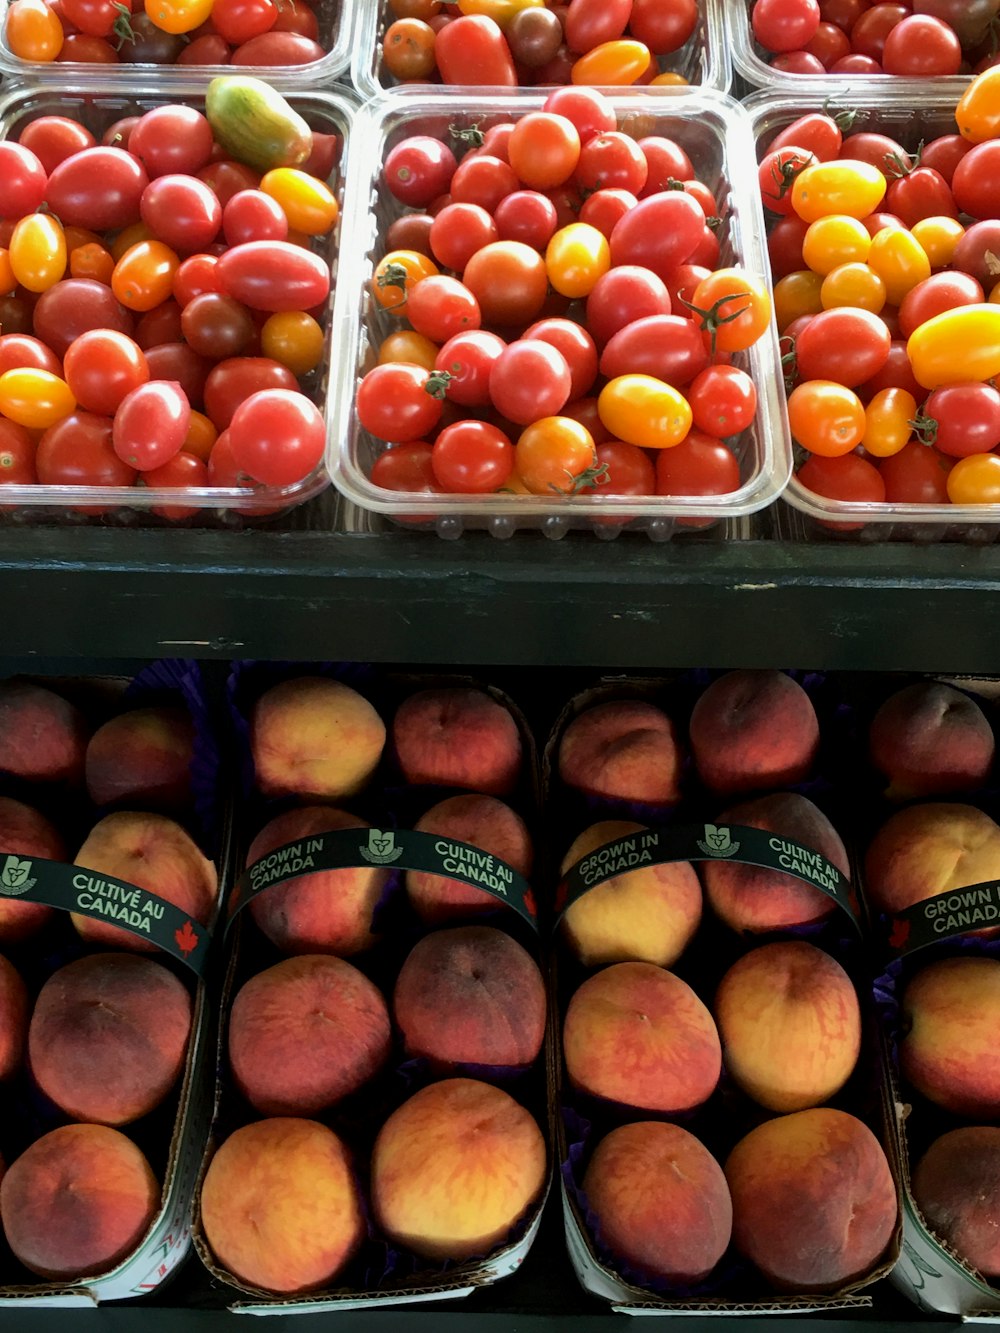 red apples on clear plastic container